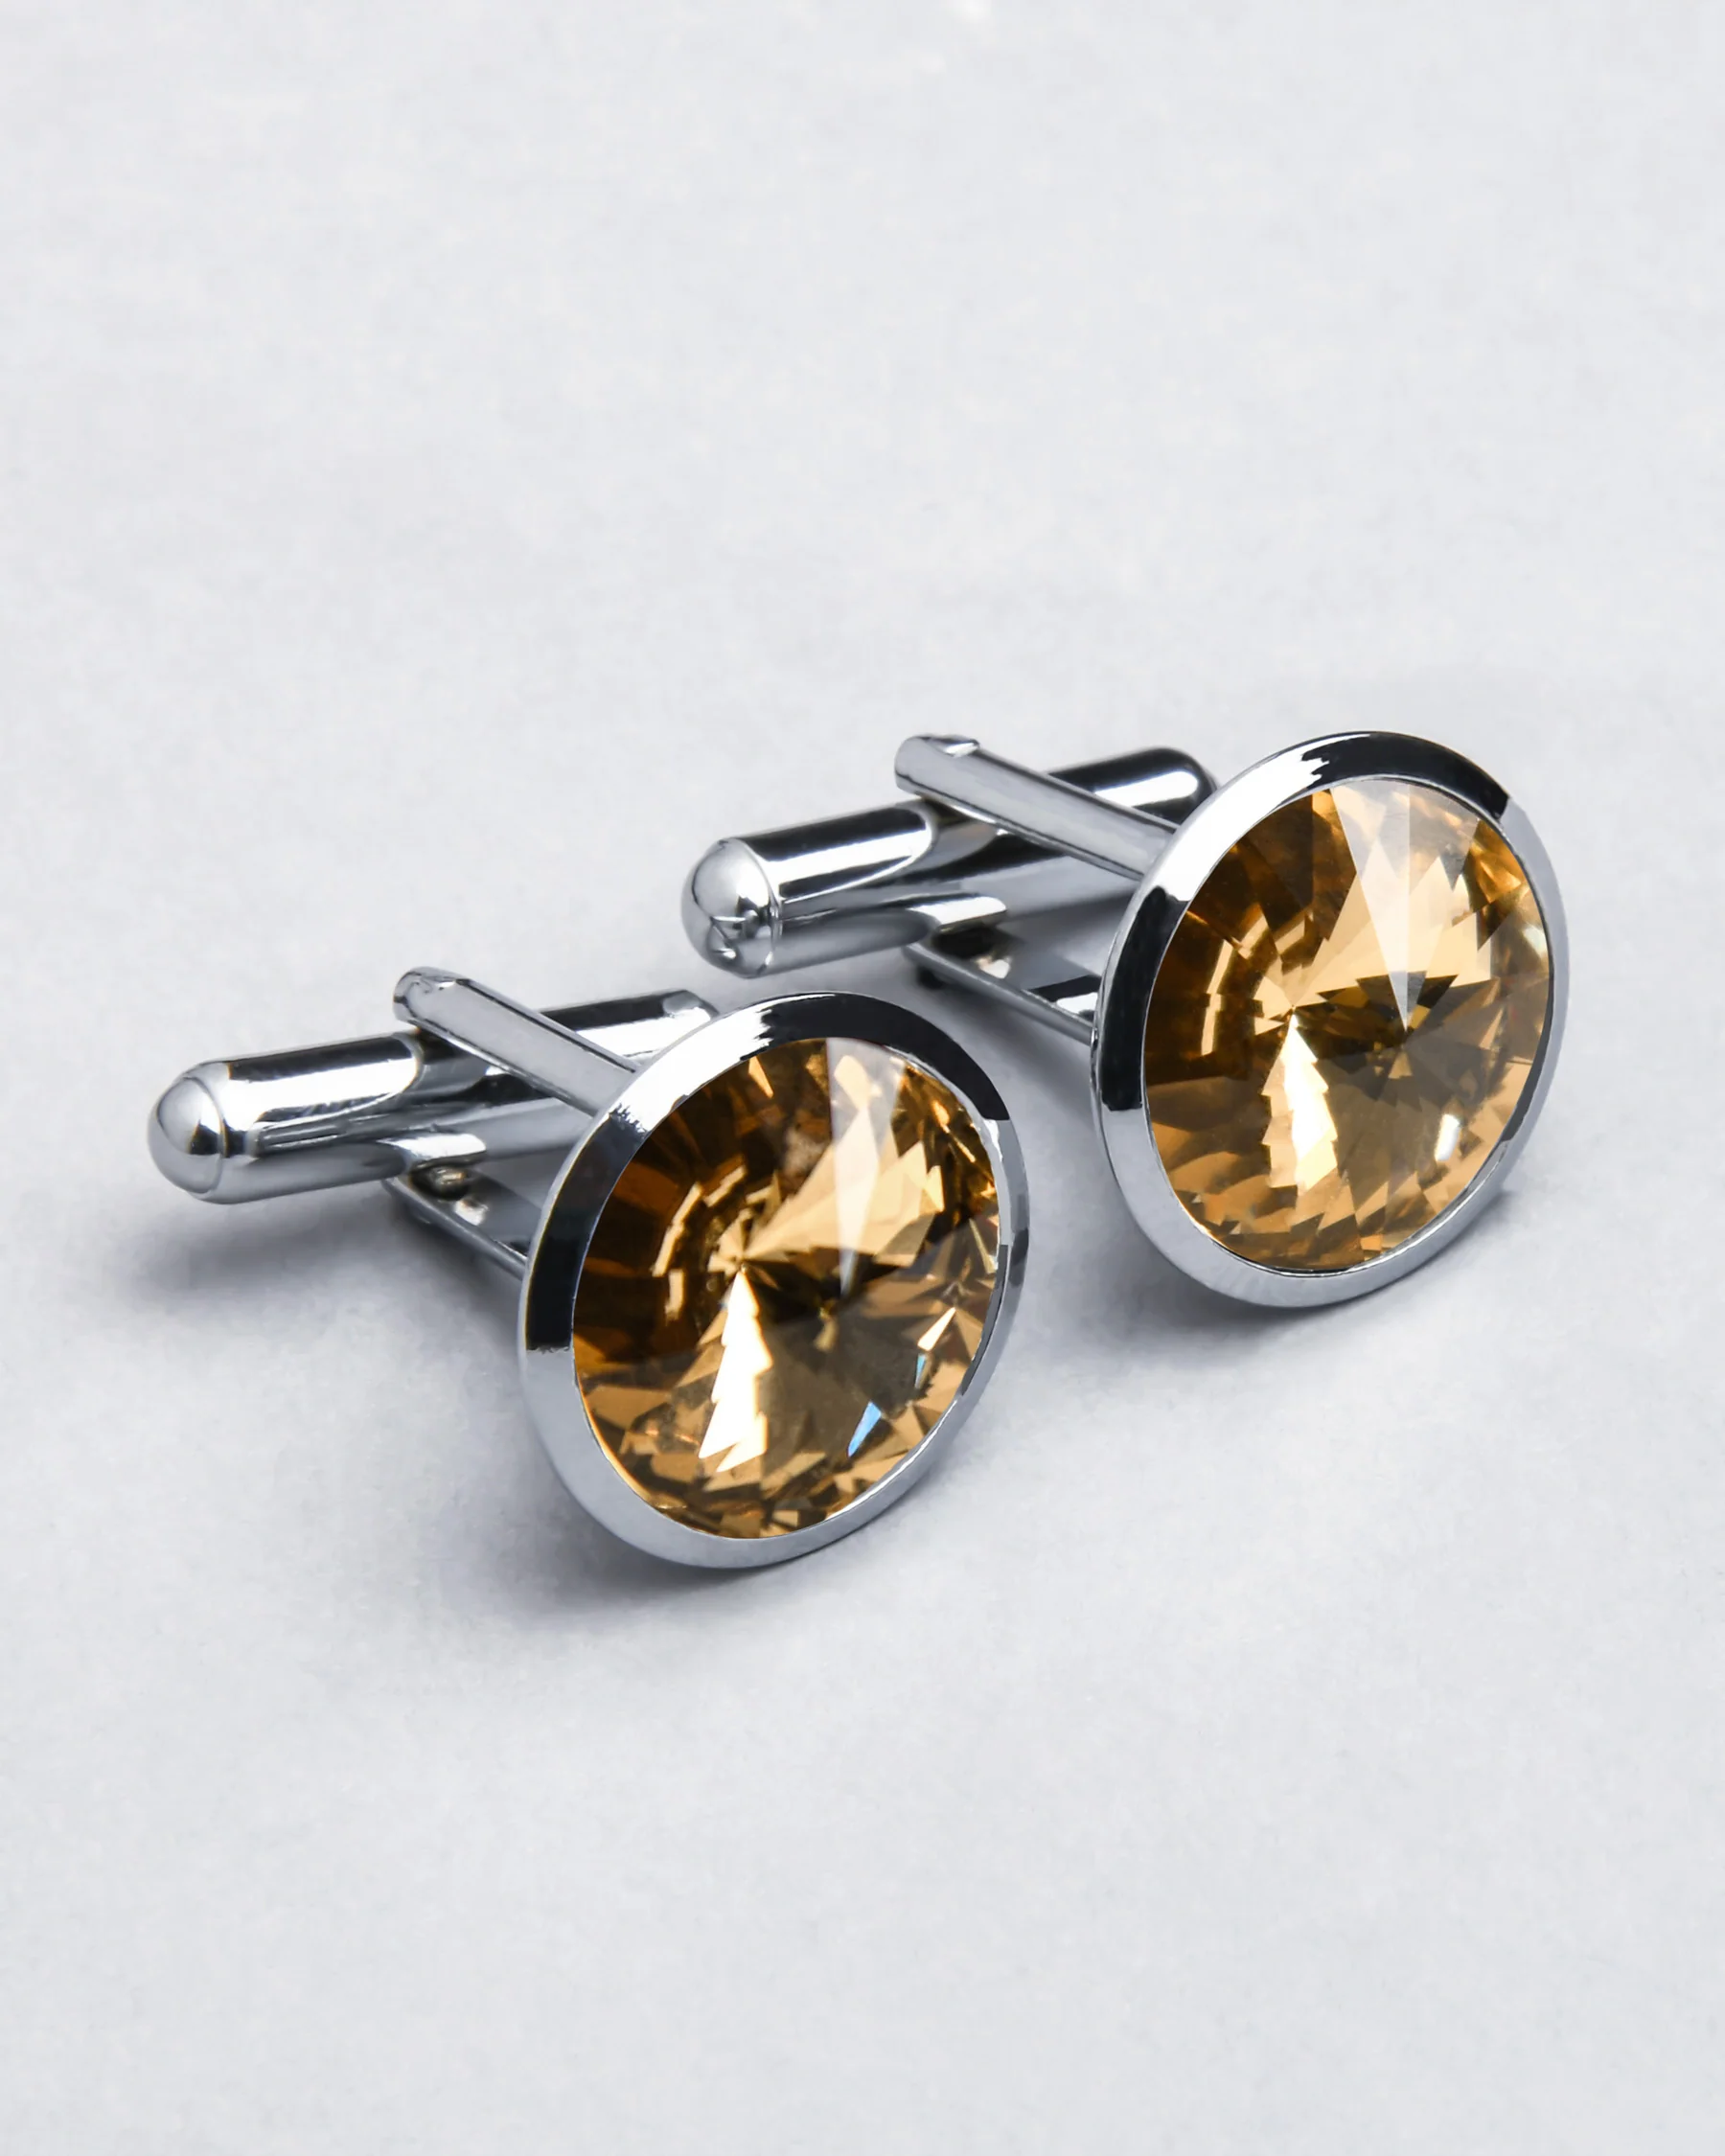 The ROI of Cufflinks in Today's Business World